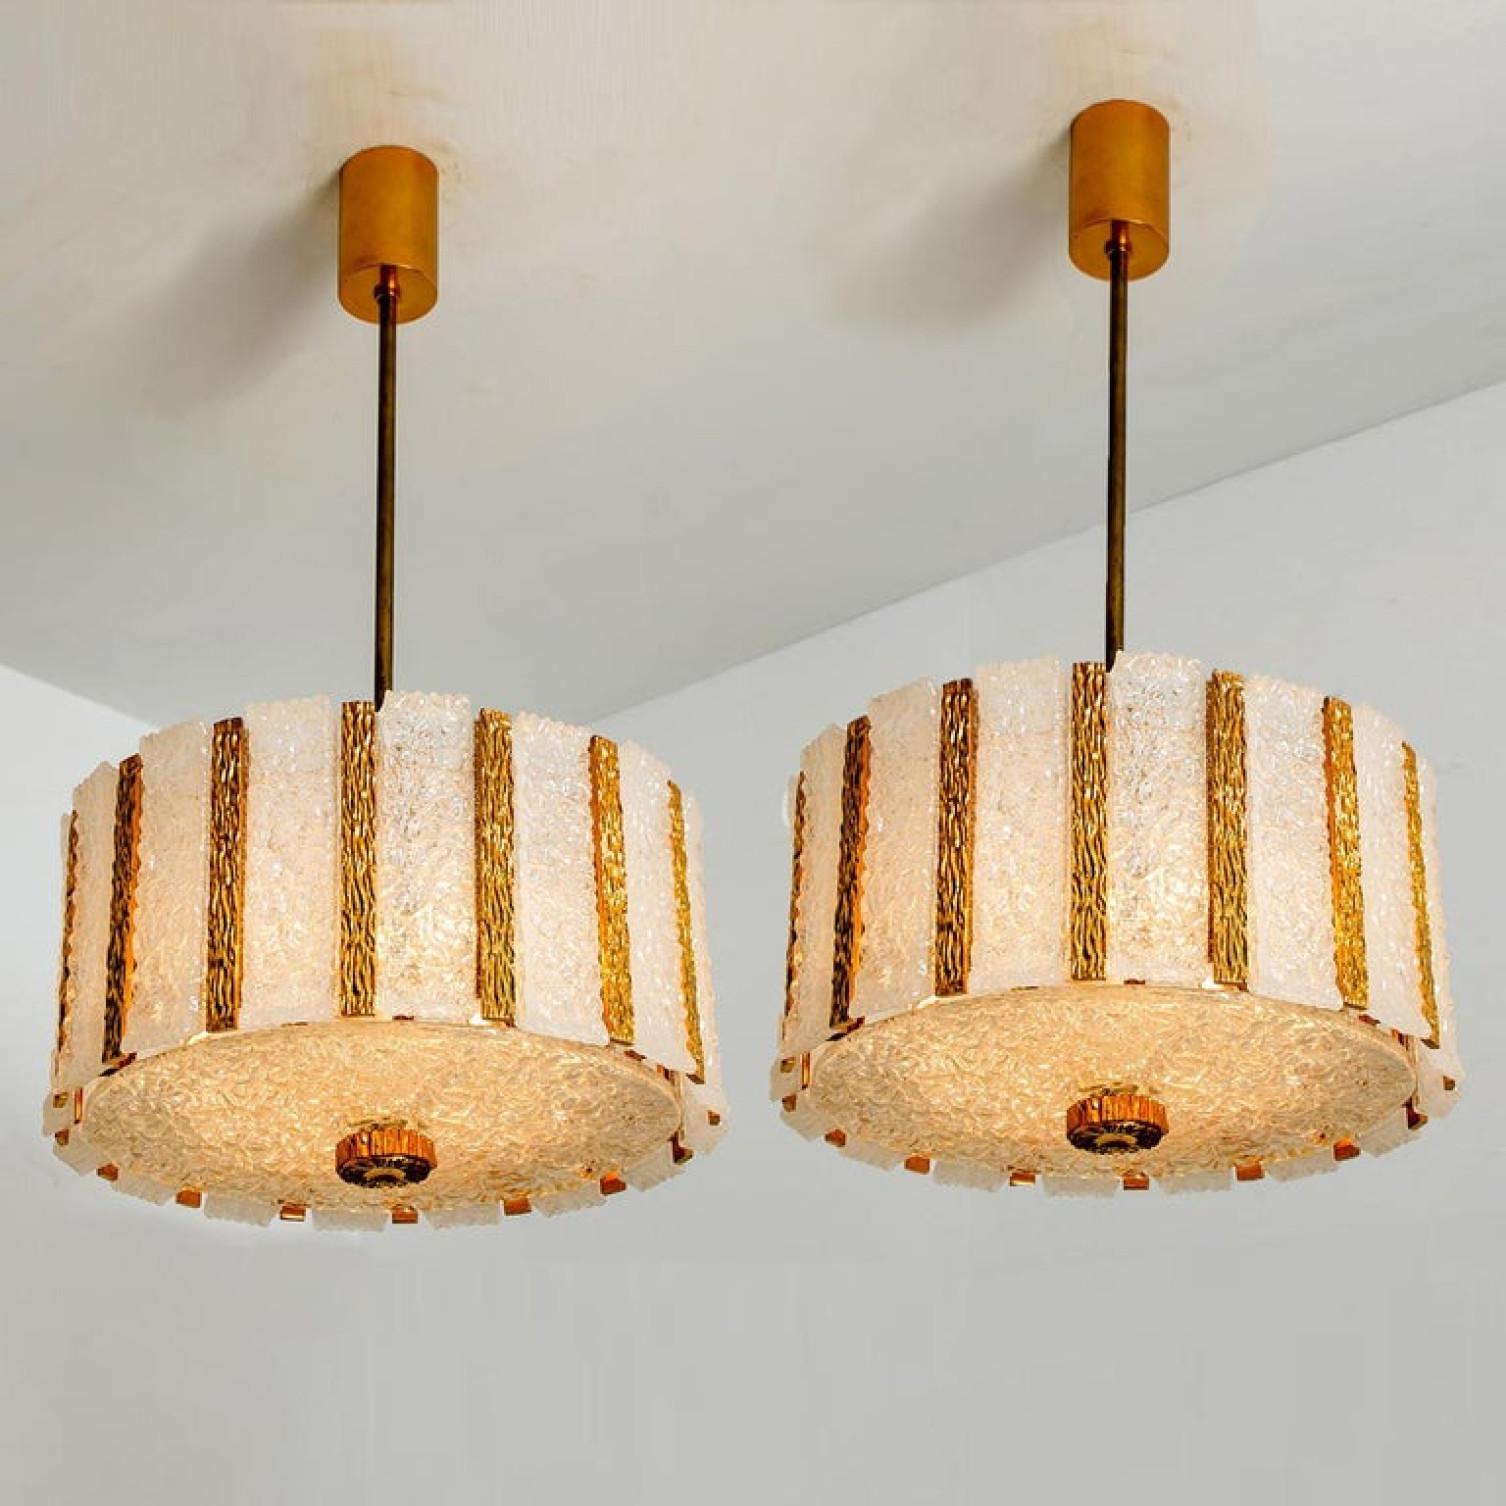 Mid-Century Modern Pair of Gold-Plated Bronze Drum Light Fixtures, 1960s, Austria For Sale